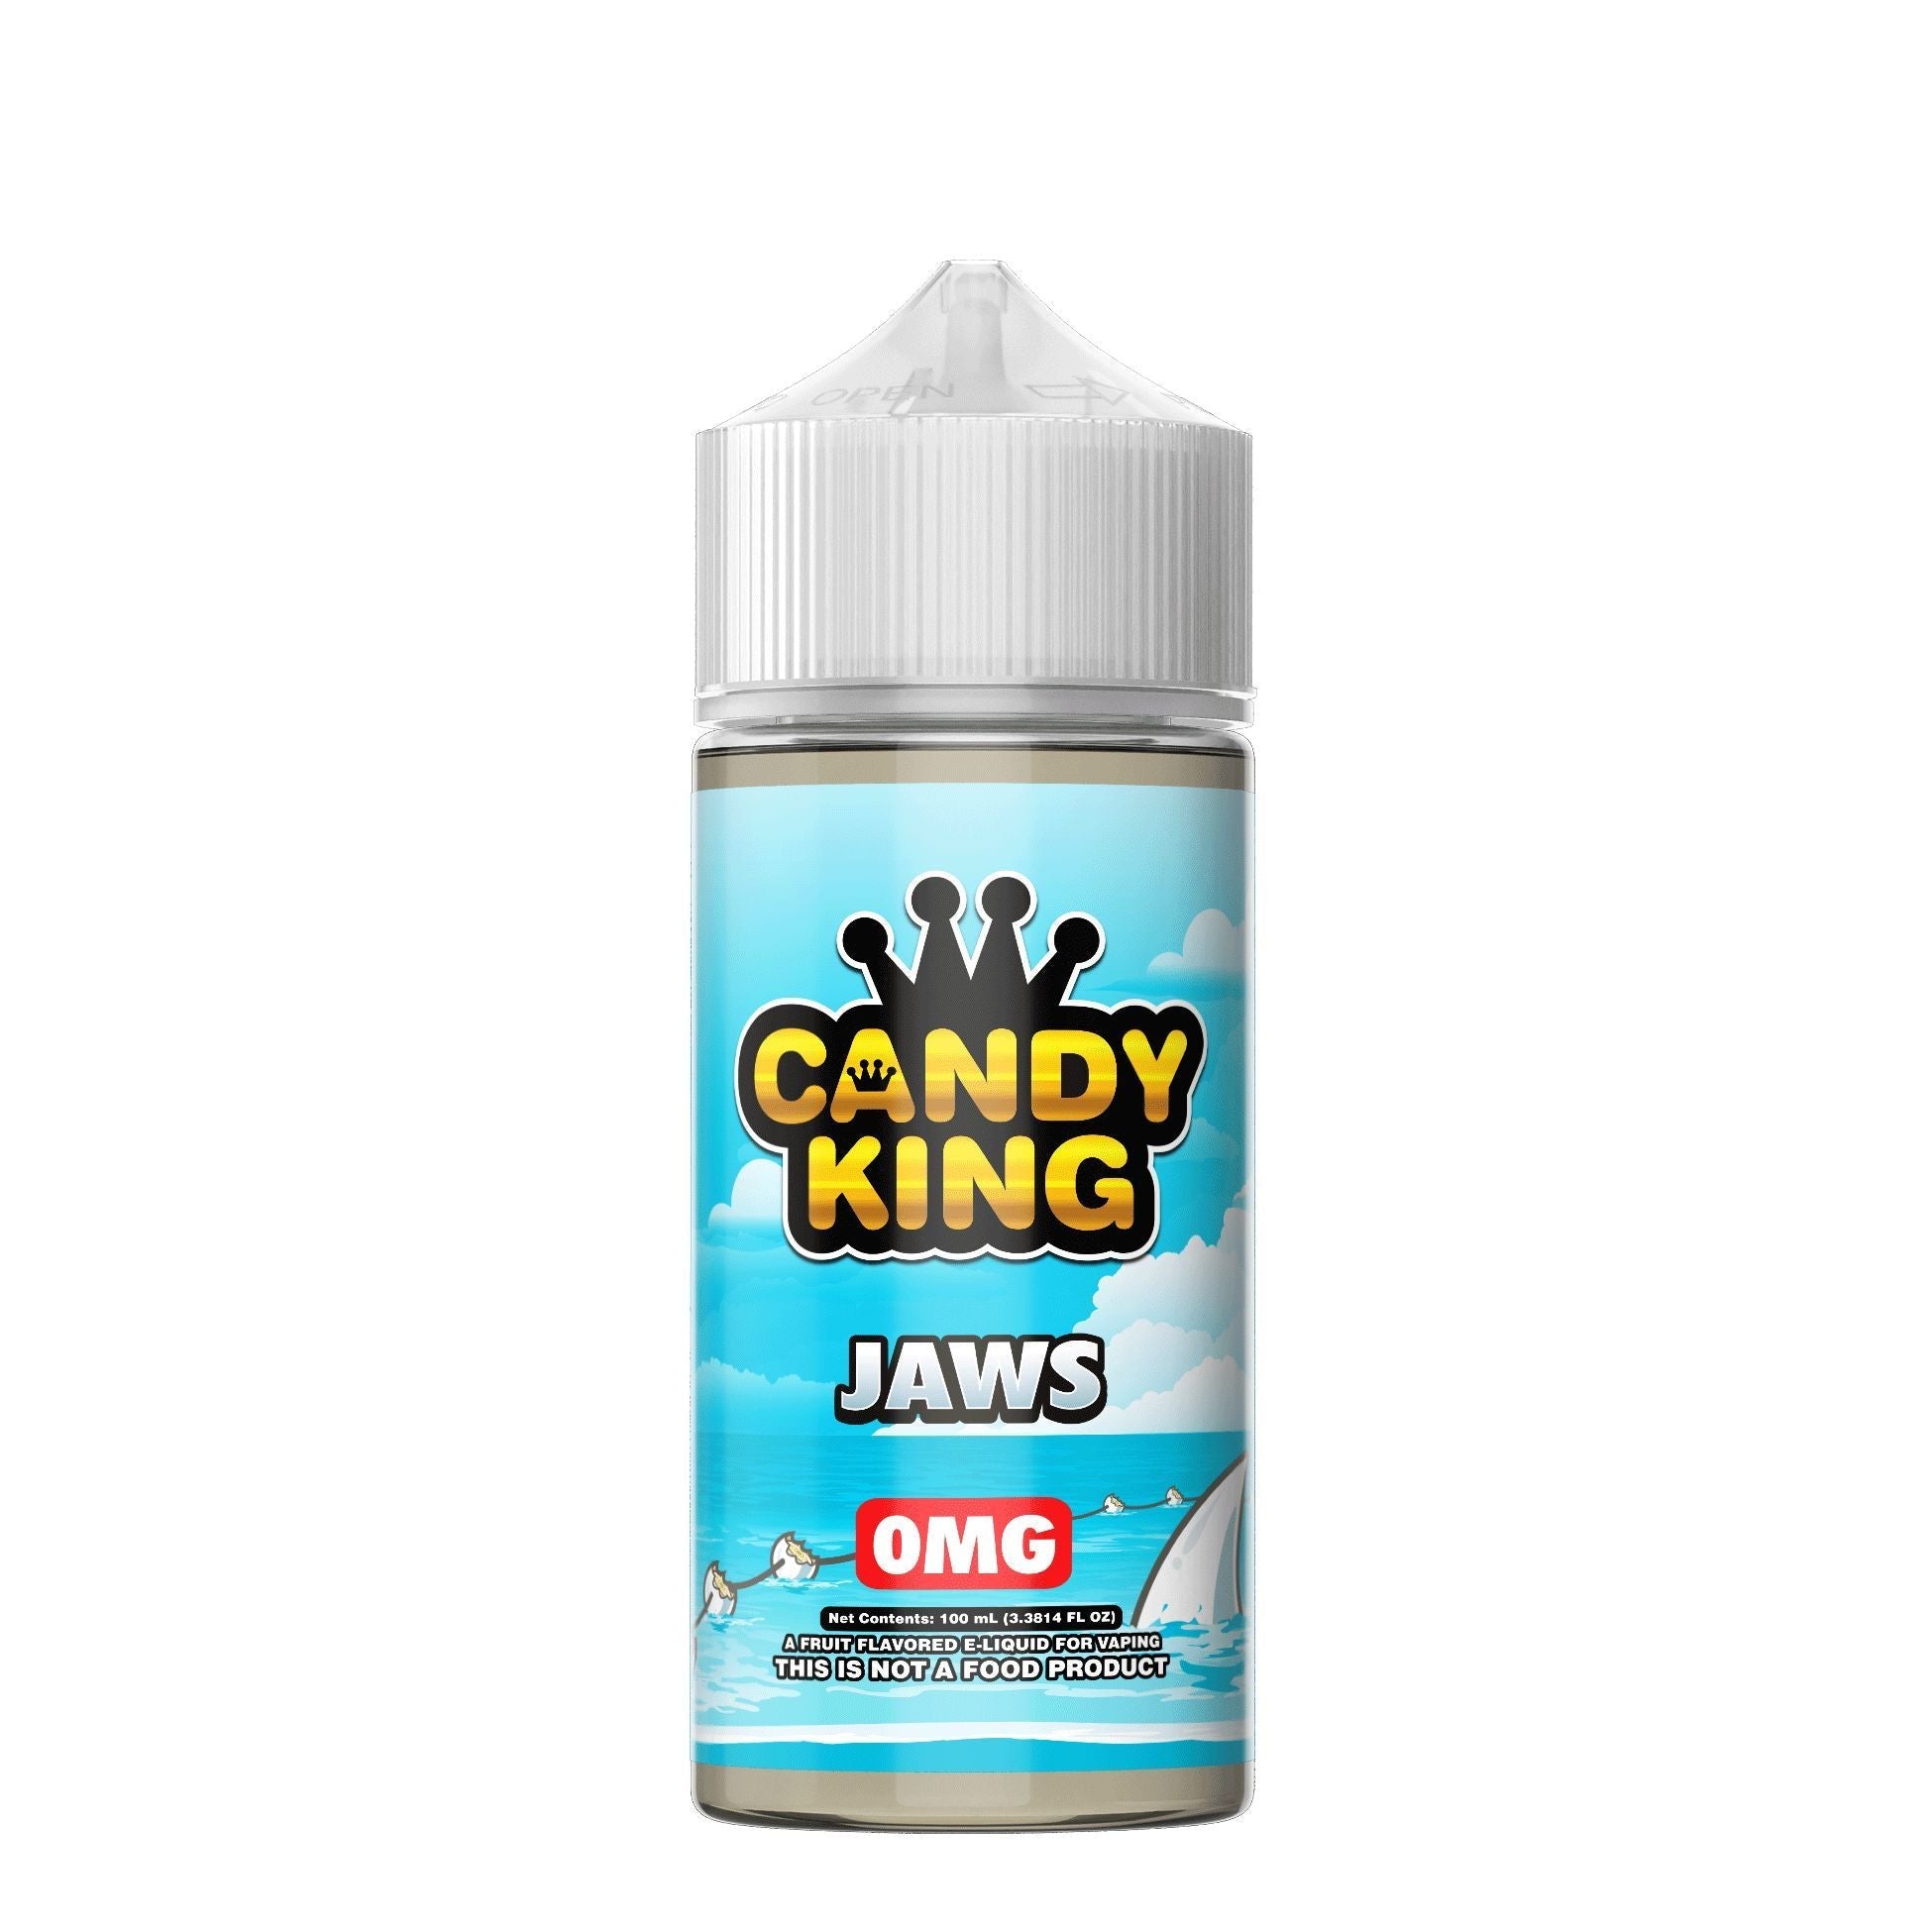 Buy Jaws by Candy King - Wick And Wire Co Melbourne Vape Shop, Victoria Australia